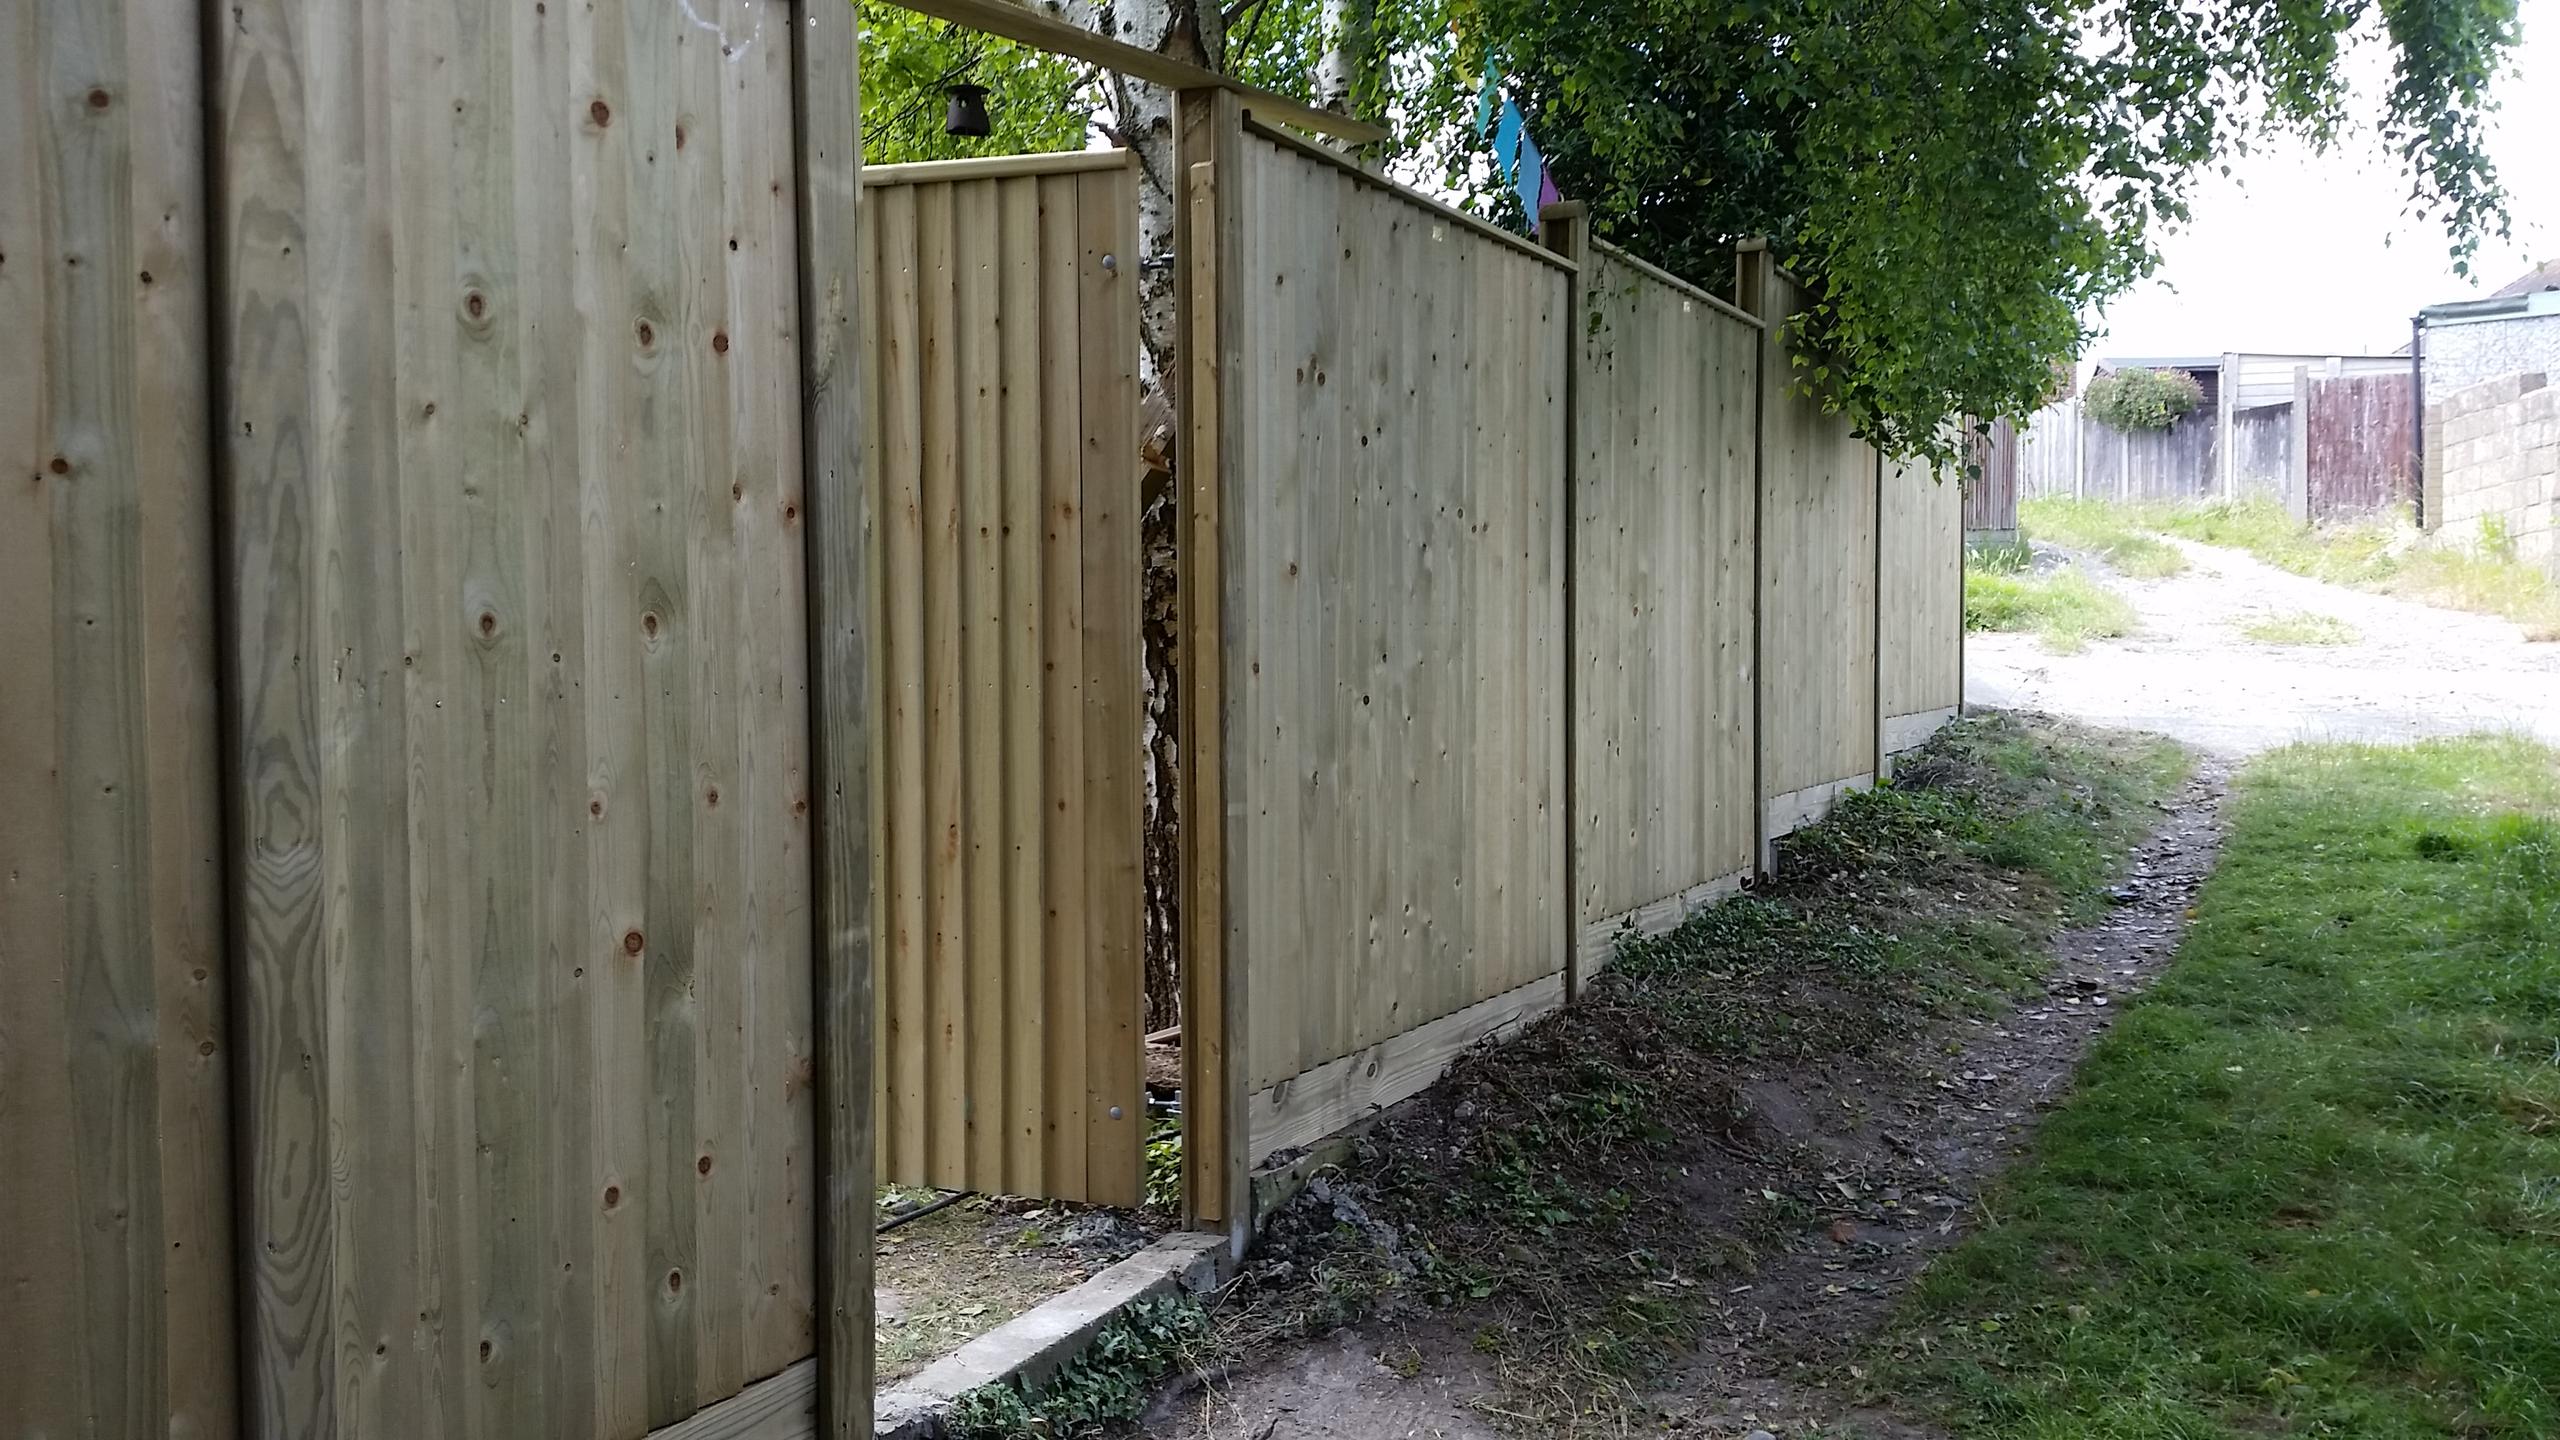 Jackson fencing installed by sheridan fencing in Davis estate, Chatham